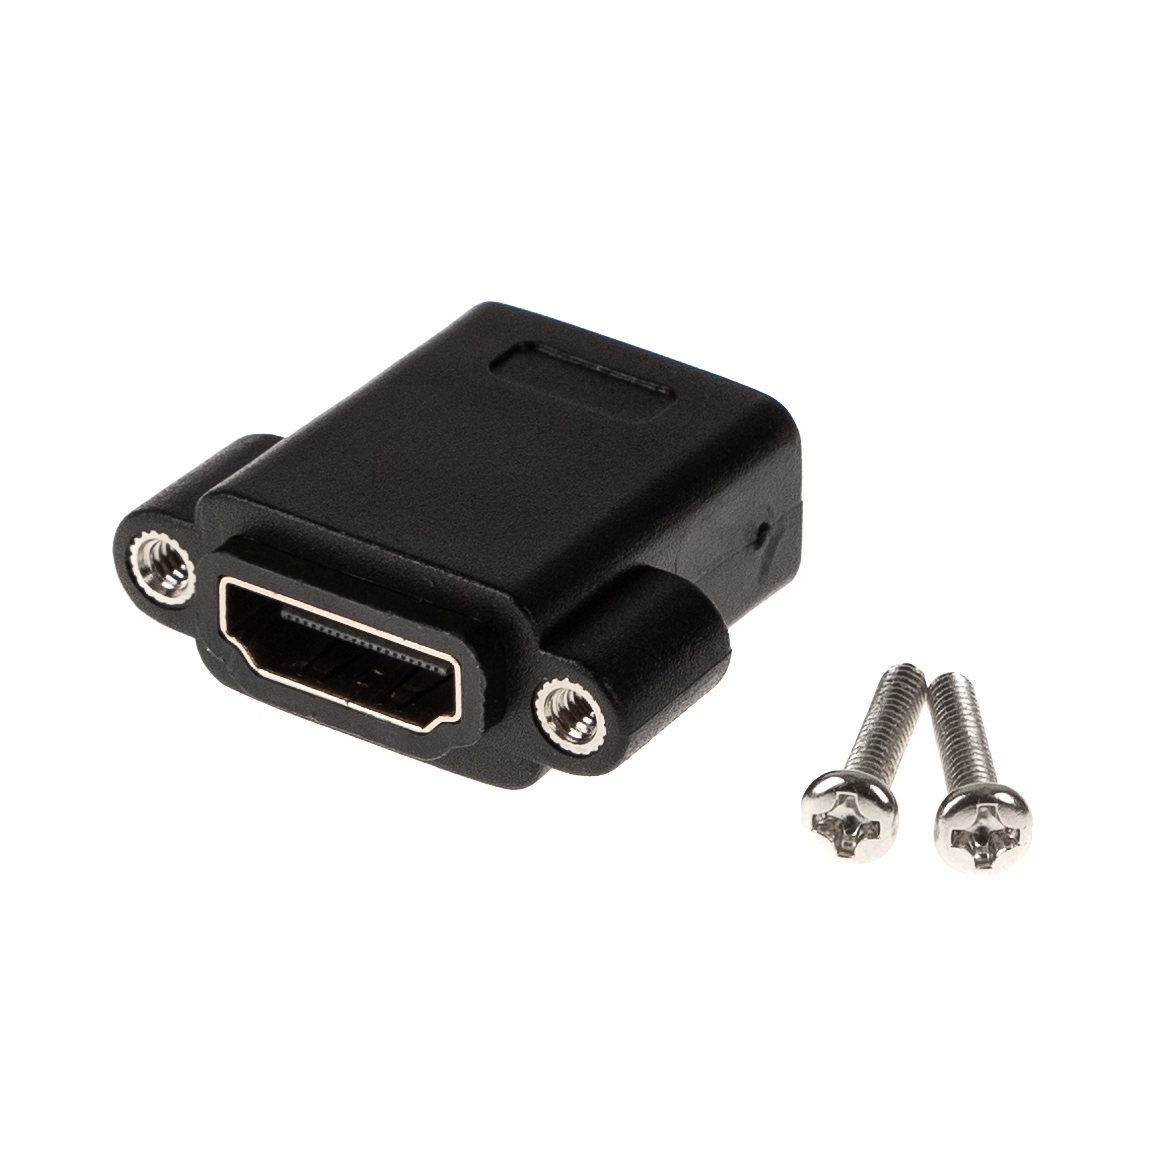 HDMI adapter for panel mounting, 2x HDMI-A female, screws included